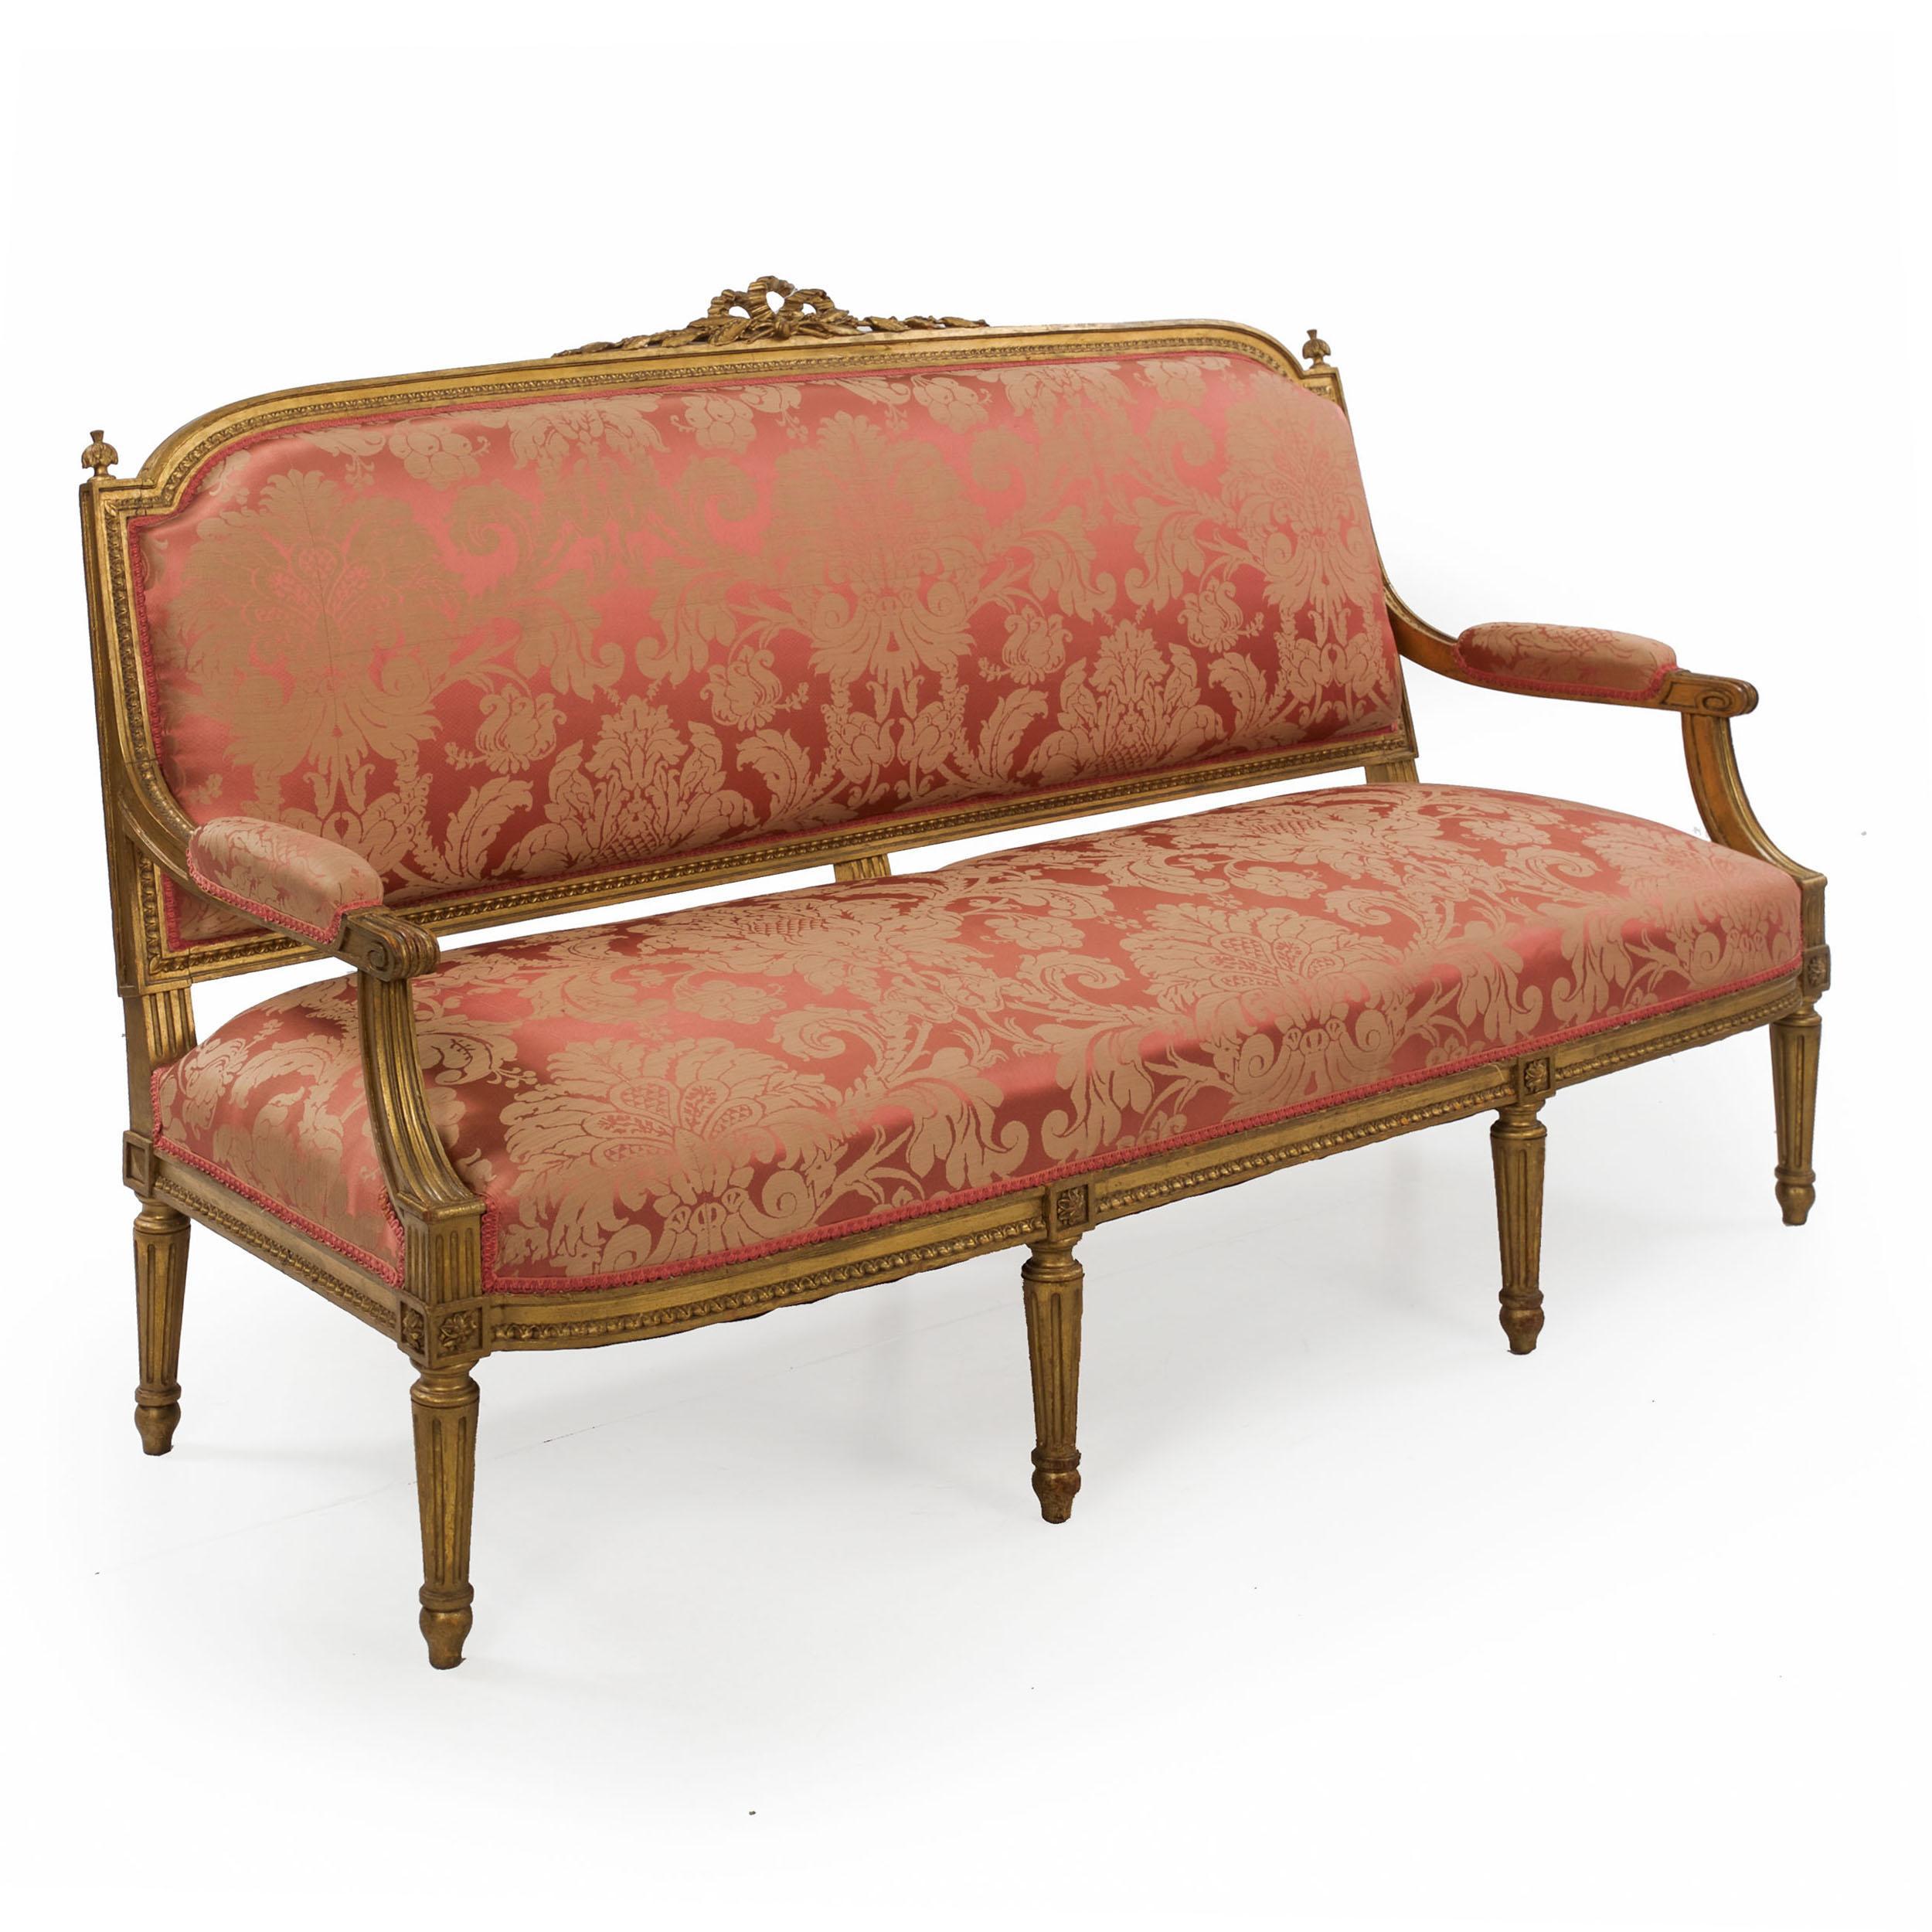 French Louis XVI Style Carved Giltwood Antique Settee Sofa 15